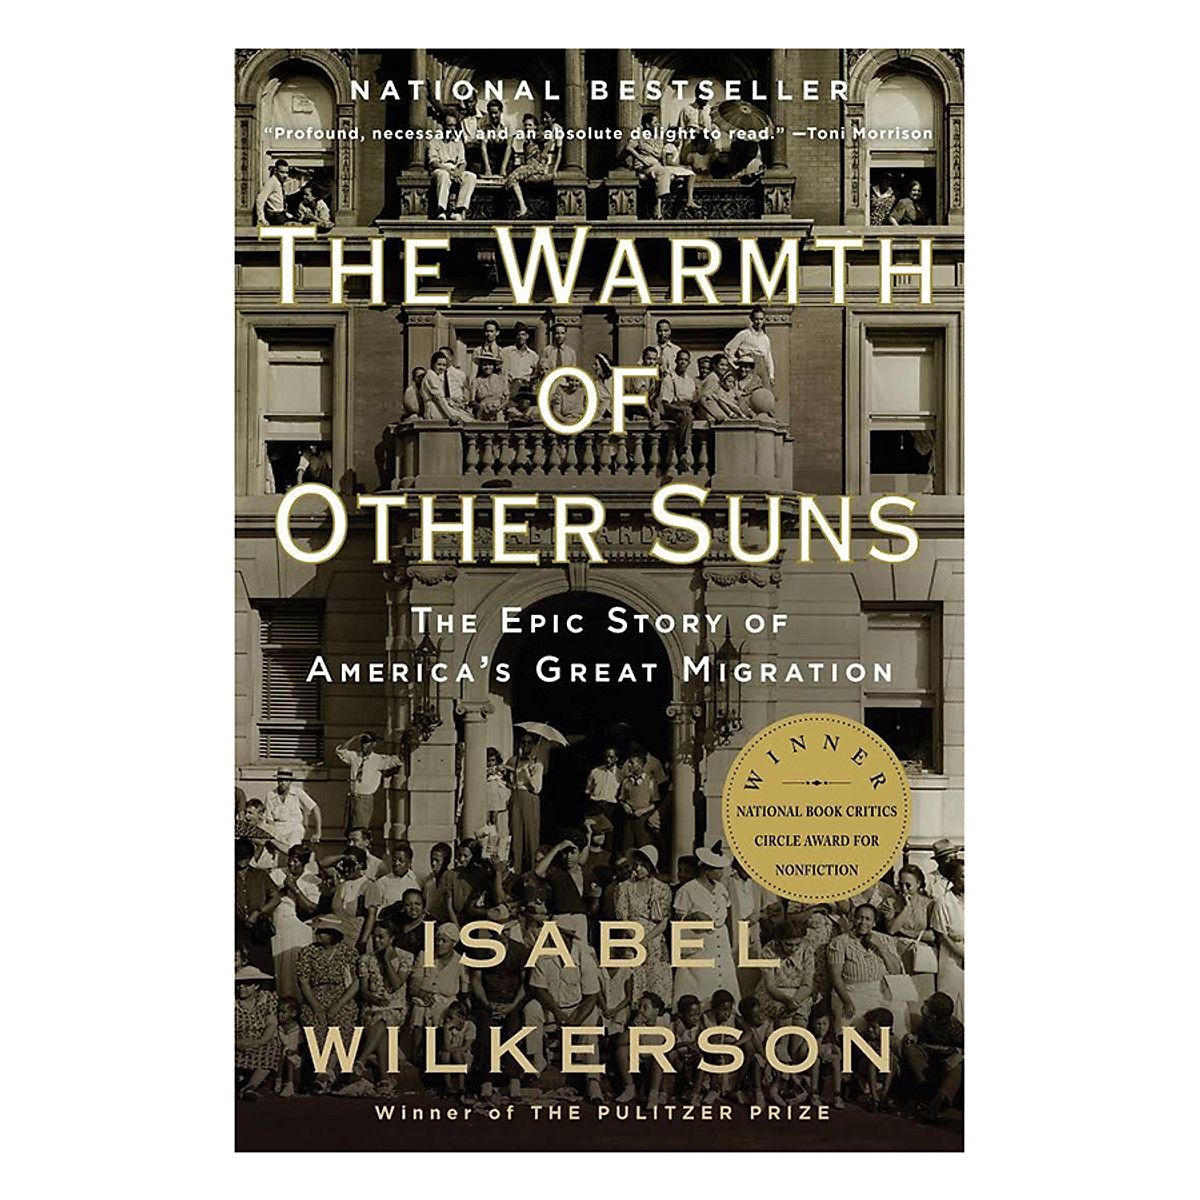 The Warmth Of Other Suns: The Epic Story Of America's Great Migration